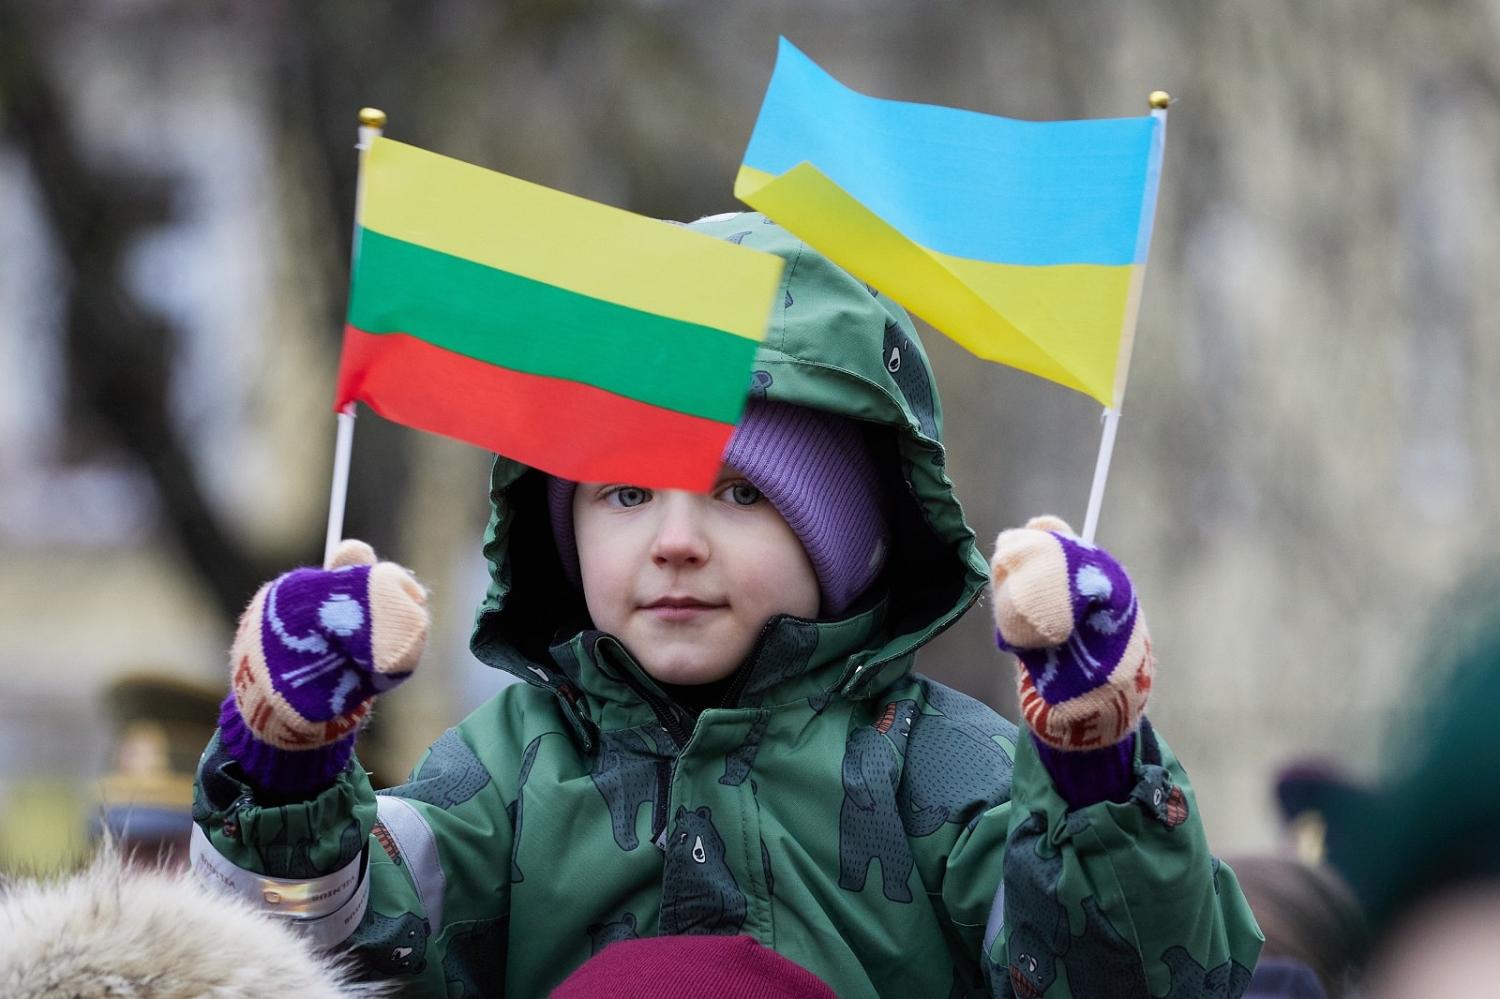 BNN INTERVIEW  Historian: Russia's supporters in Latvia consider the  hoisting of Ukraine's flag a provocation - Baltic News Network